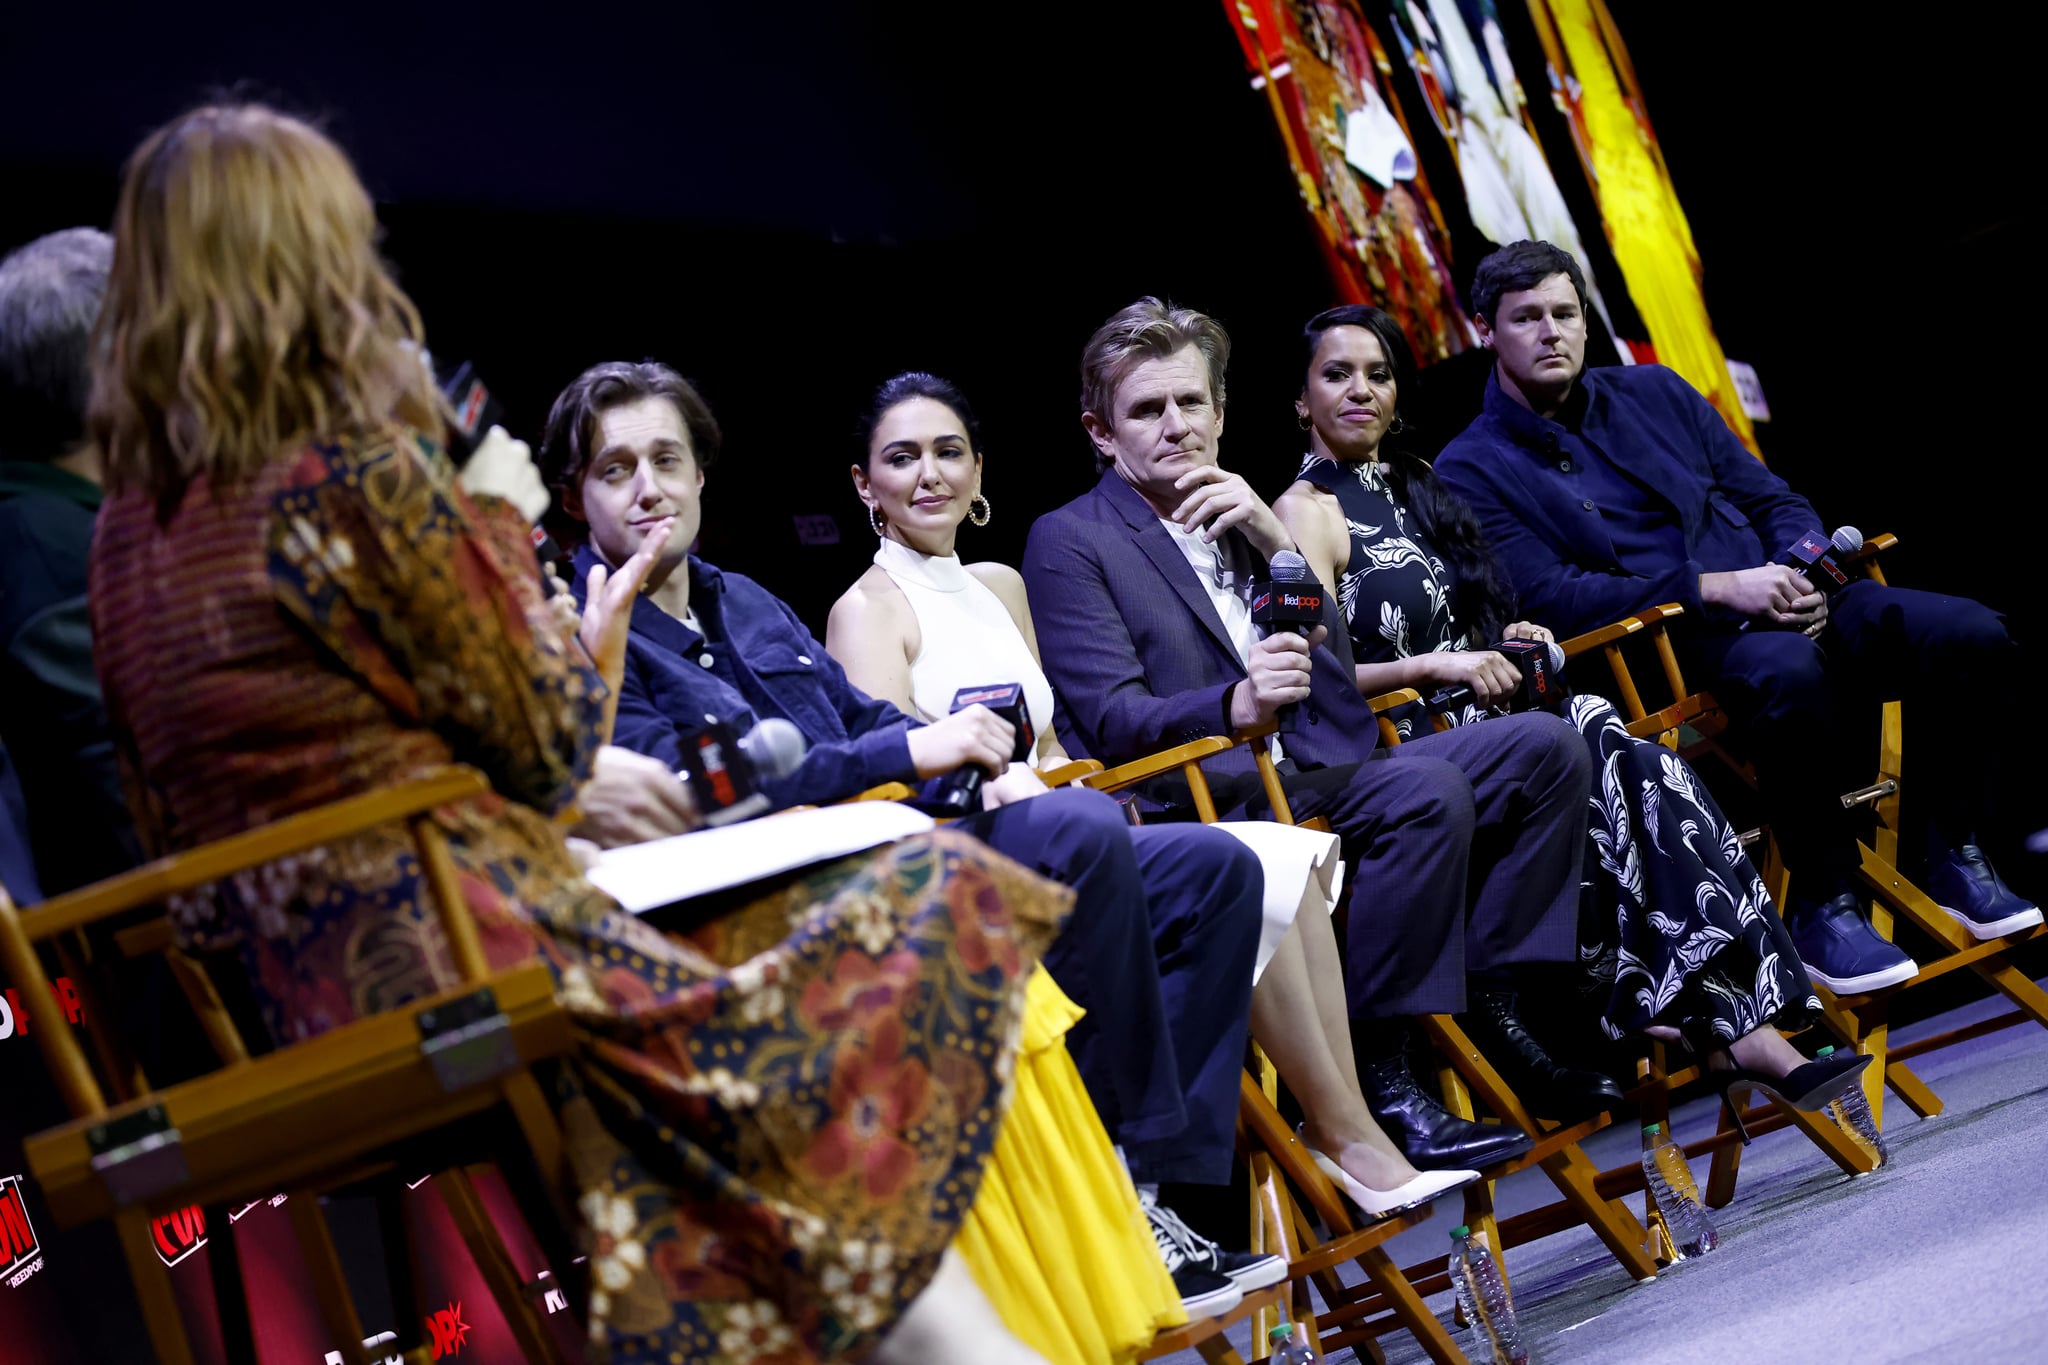 NEW YORK, NEW YORK - OCTOBER 07: (L-R) Felicia Day, Leon Wadham, Nazanin Boniadi, Charles Edwards, Sara Zwangobani and Benjamin Walker speak onstage at 'Prime Video Presents : The Lord of The Rings: The Rings of Power' panel during New York Comic Con 2022 on October 07, 2022 in New York City. (Photo by Paul Morigi/Getty Images for ReedPop)